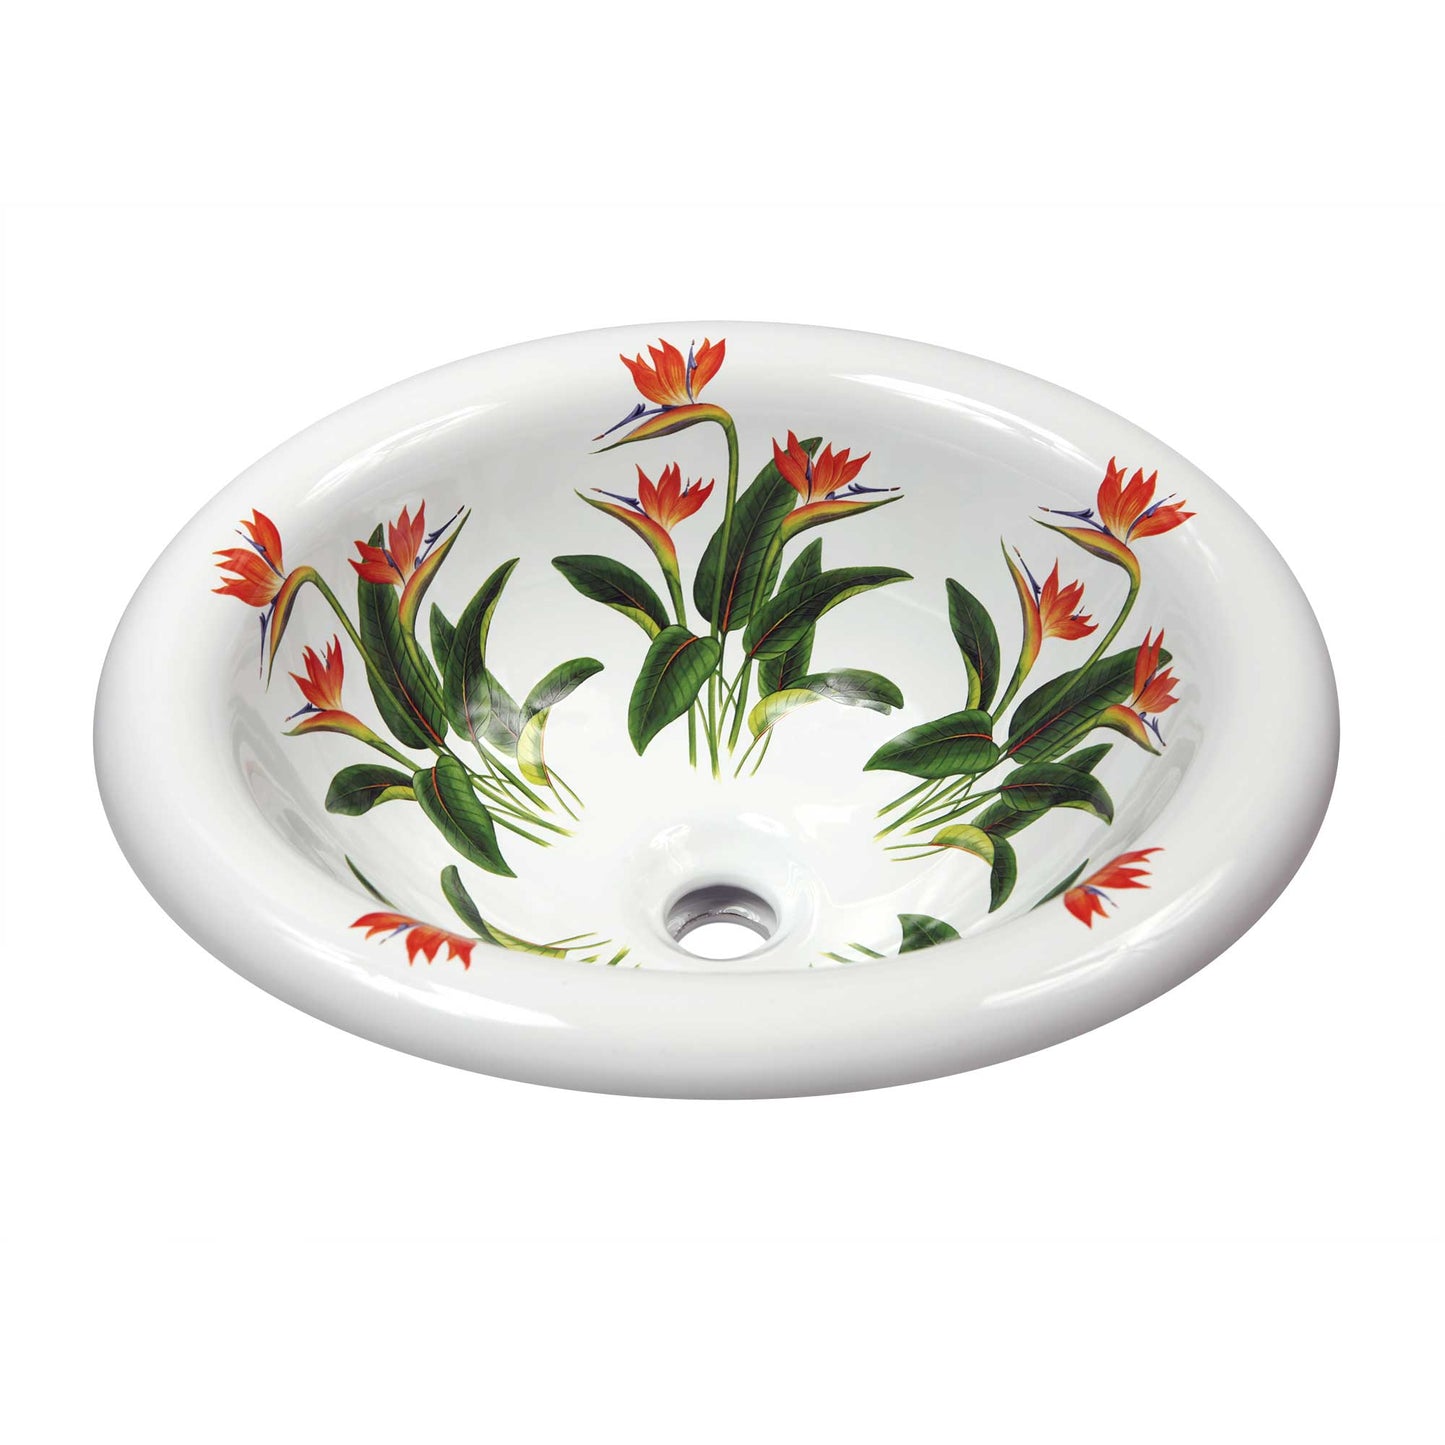 Red and orange bird of paradise flowers painted on a drop-in bathroom sink